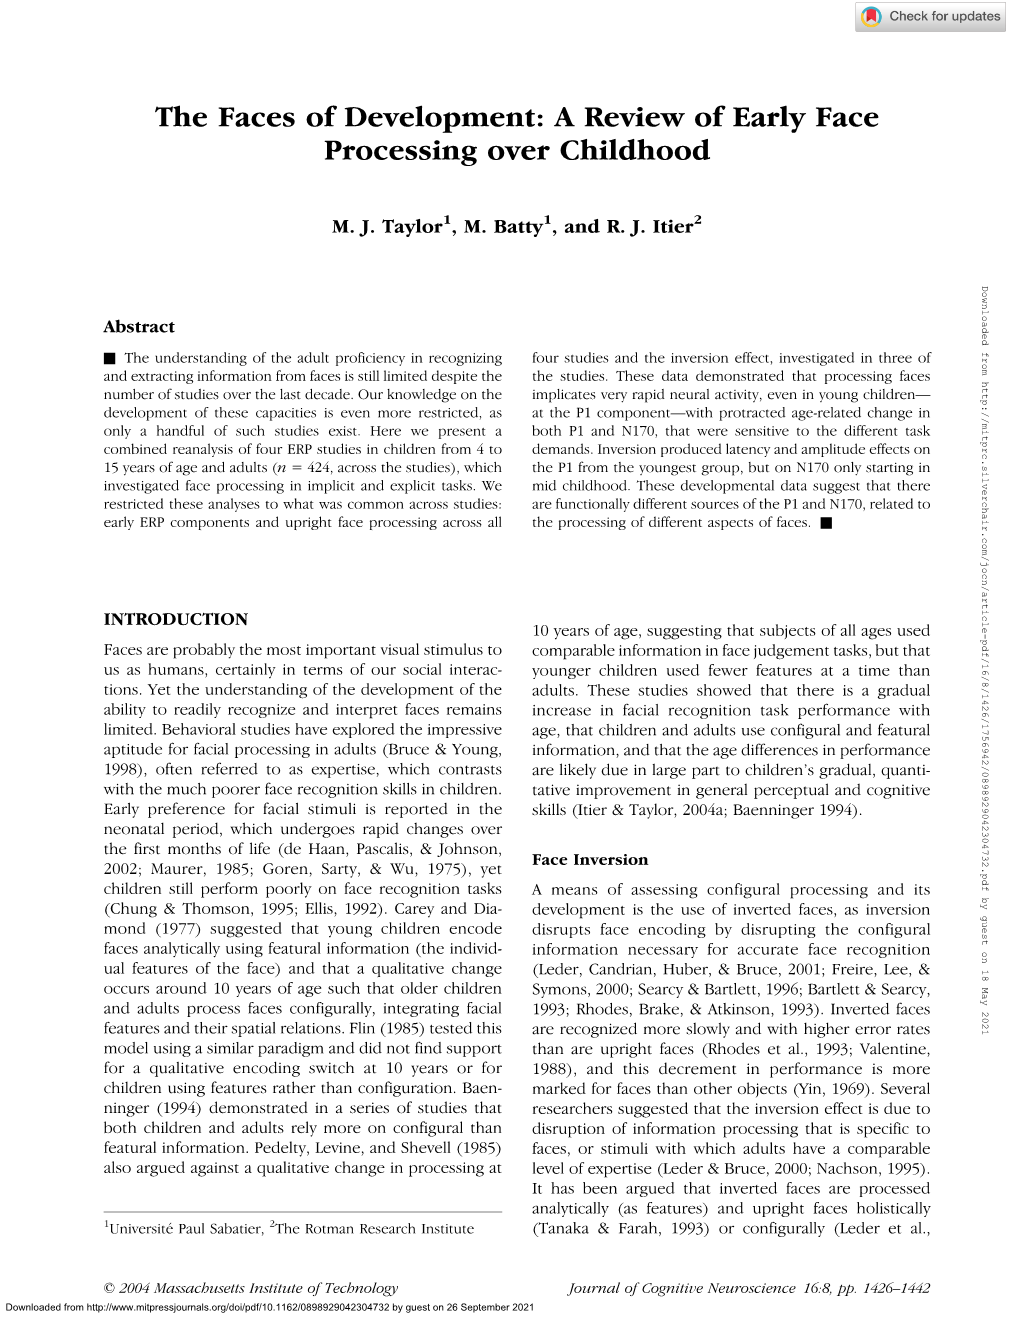 The Faces of Development: a Review of Early Face Processing Over Childhood